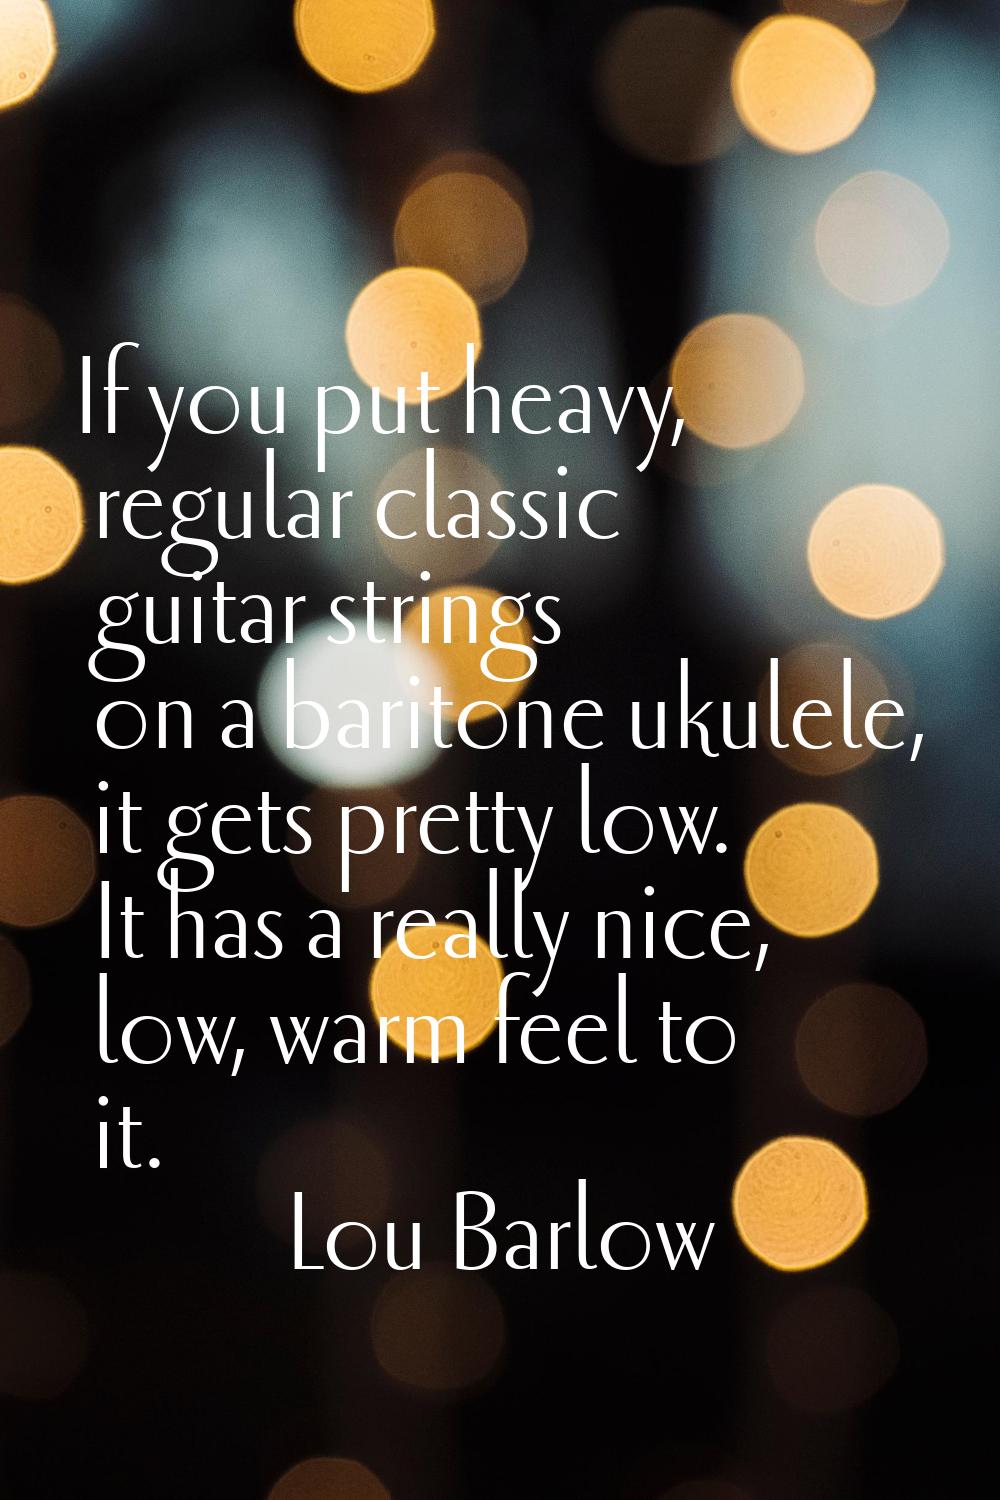 If you put heavy, regular classic guitar strings on a baritone ukulele, it gets pretty low. It has 